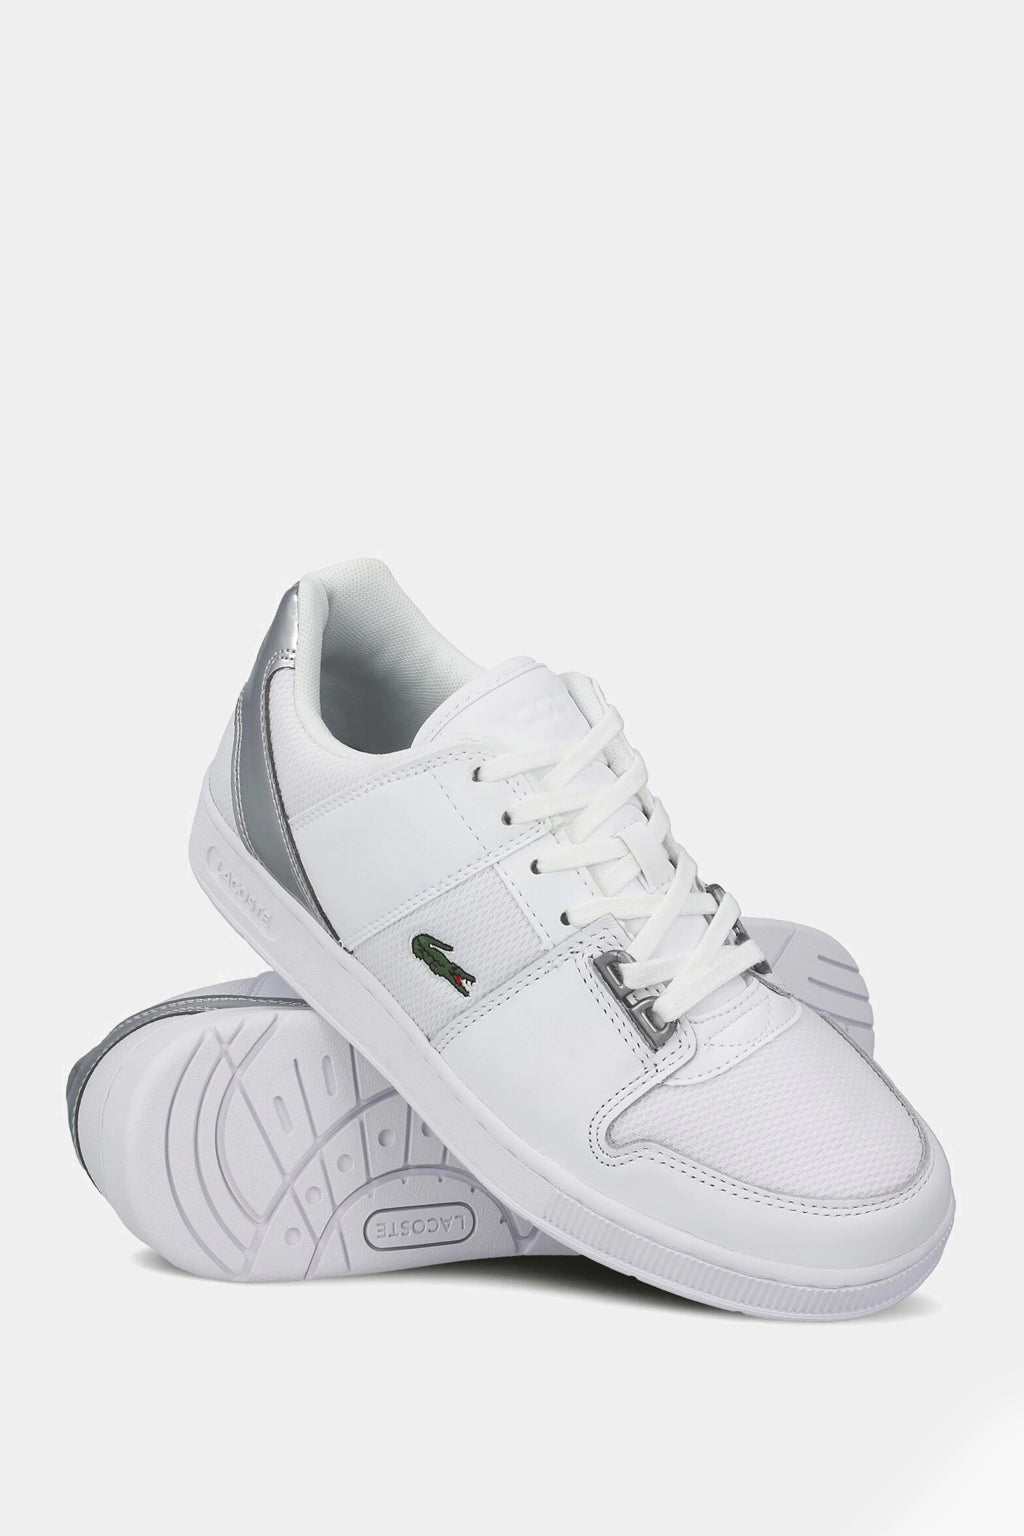 Lacoste - Lacoste Thrill 220 1 Sfa Shoes